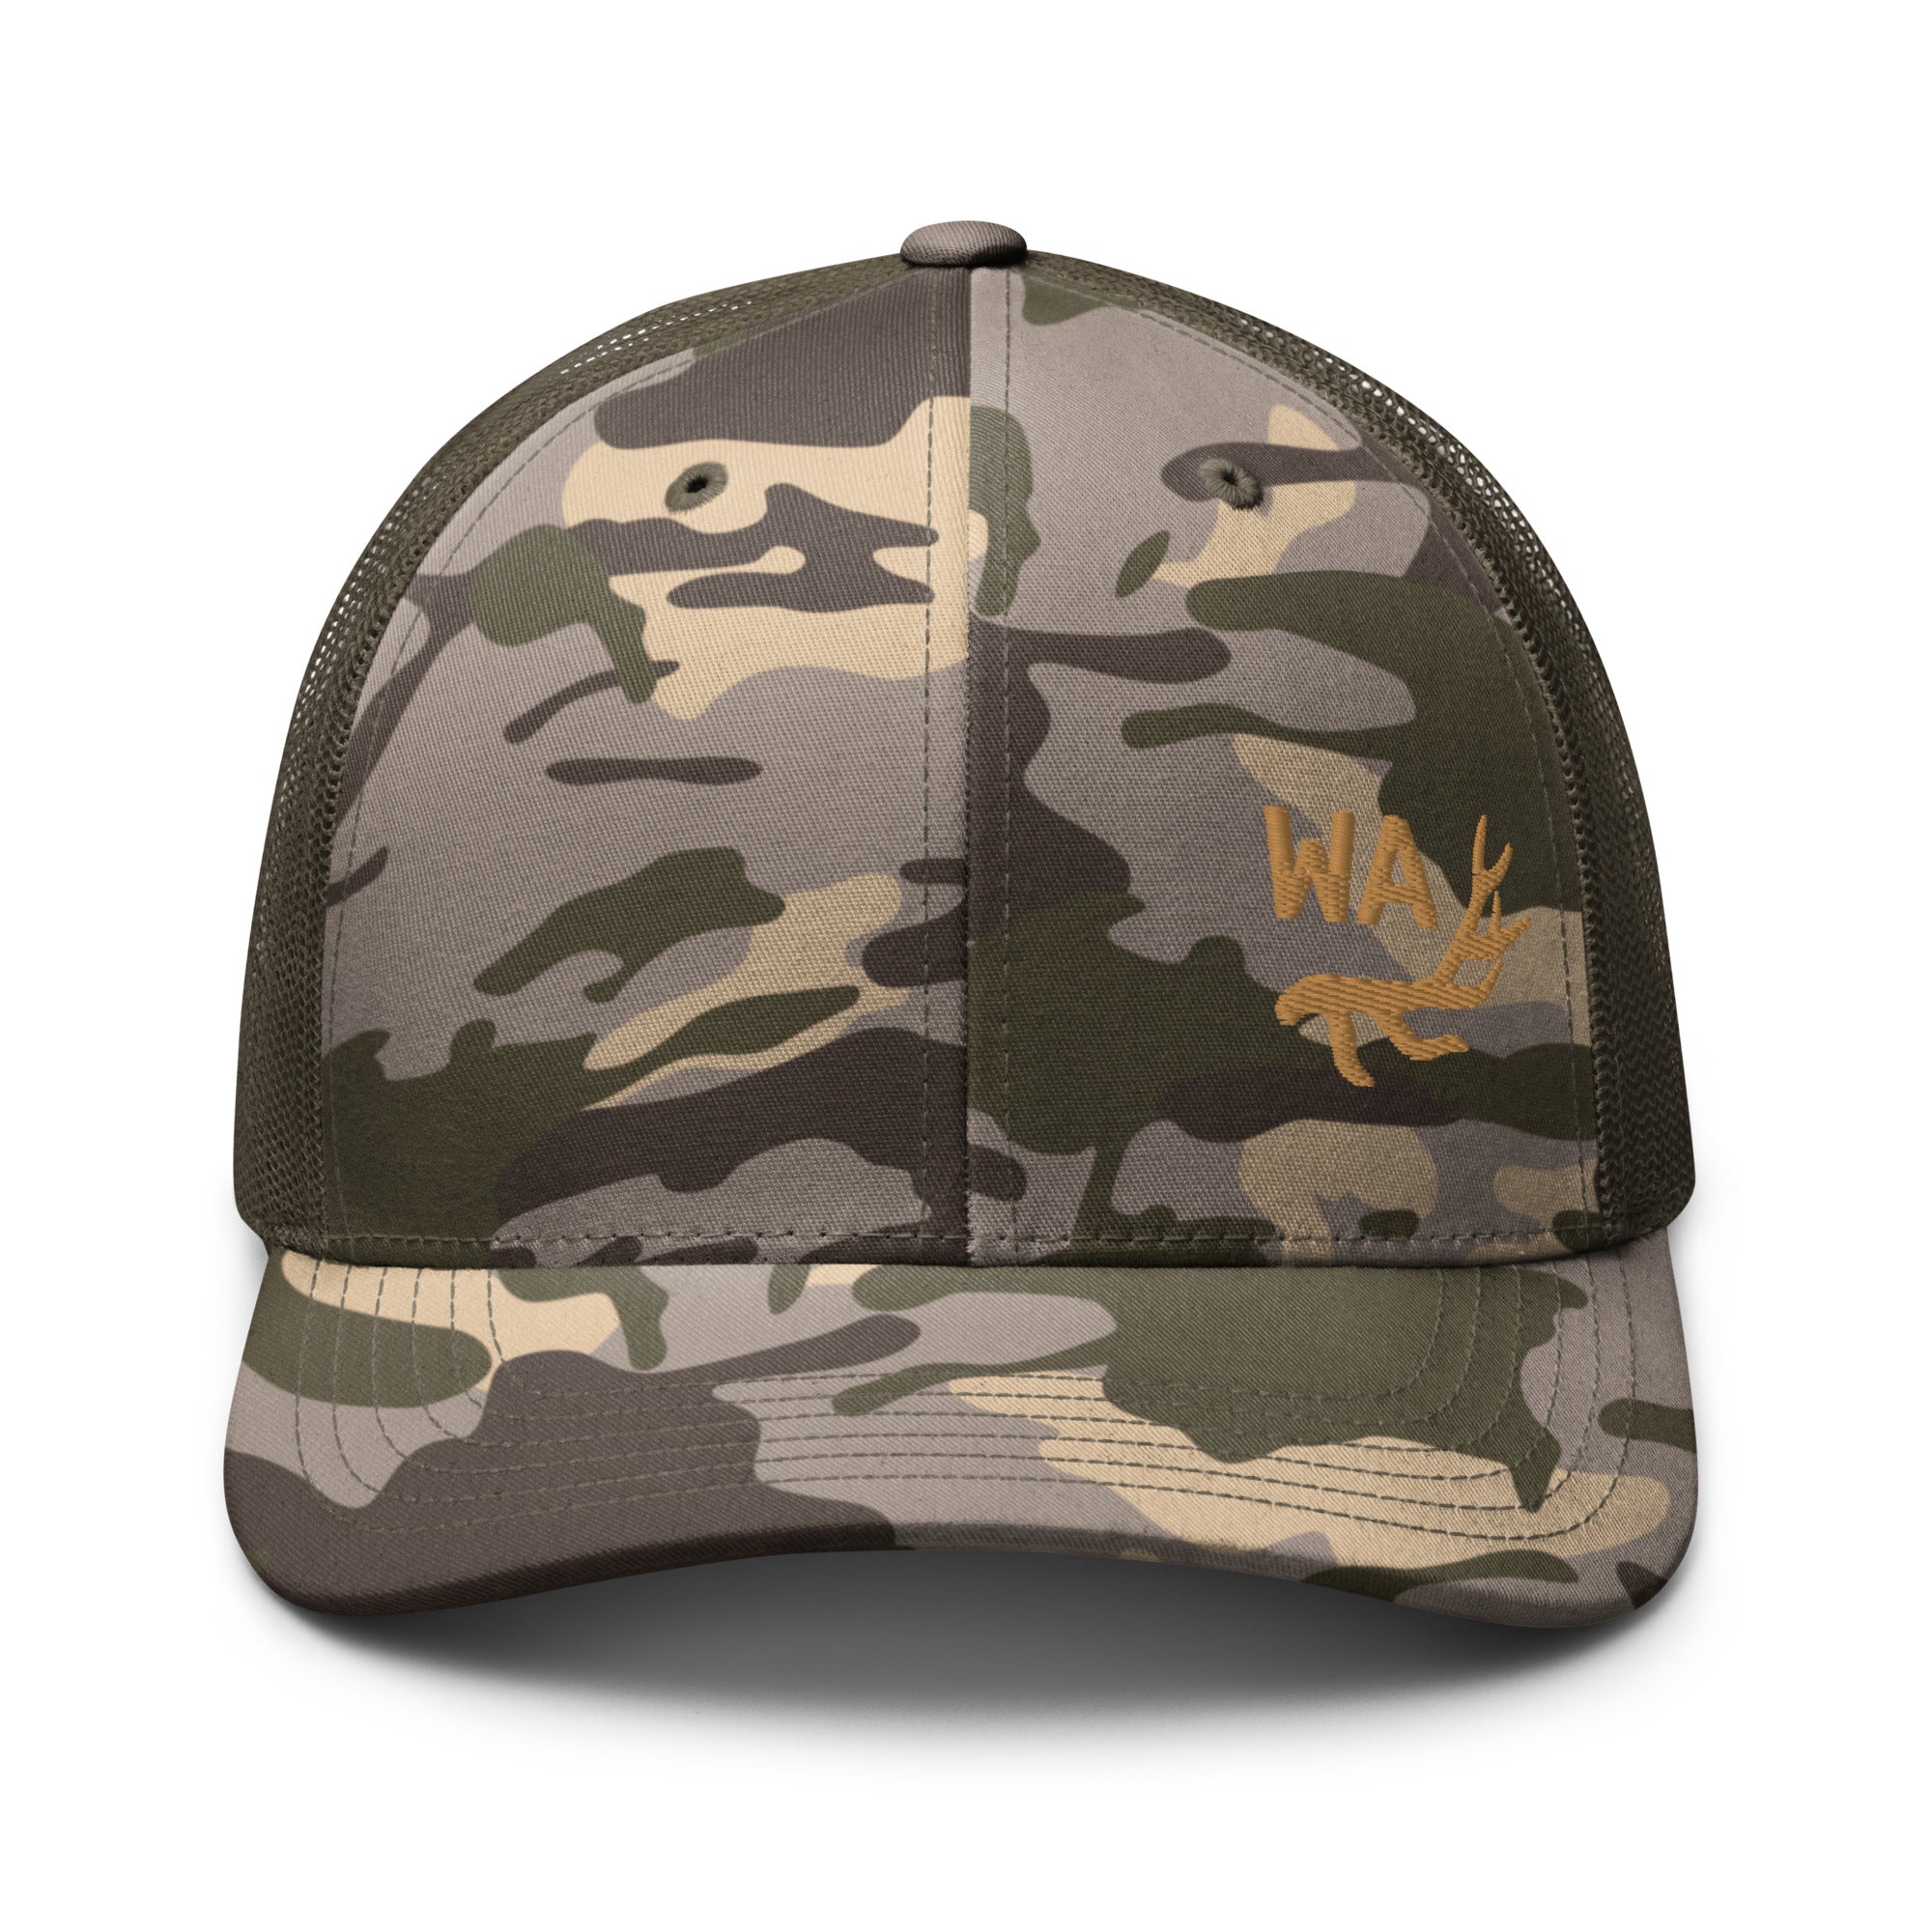 camouflage-trucker-hat-camo-olive-front-655e67d4ef9f3.jpg